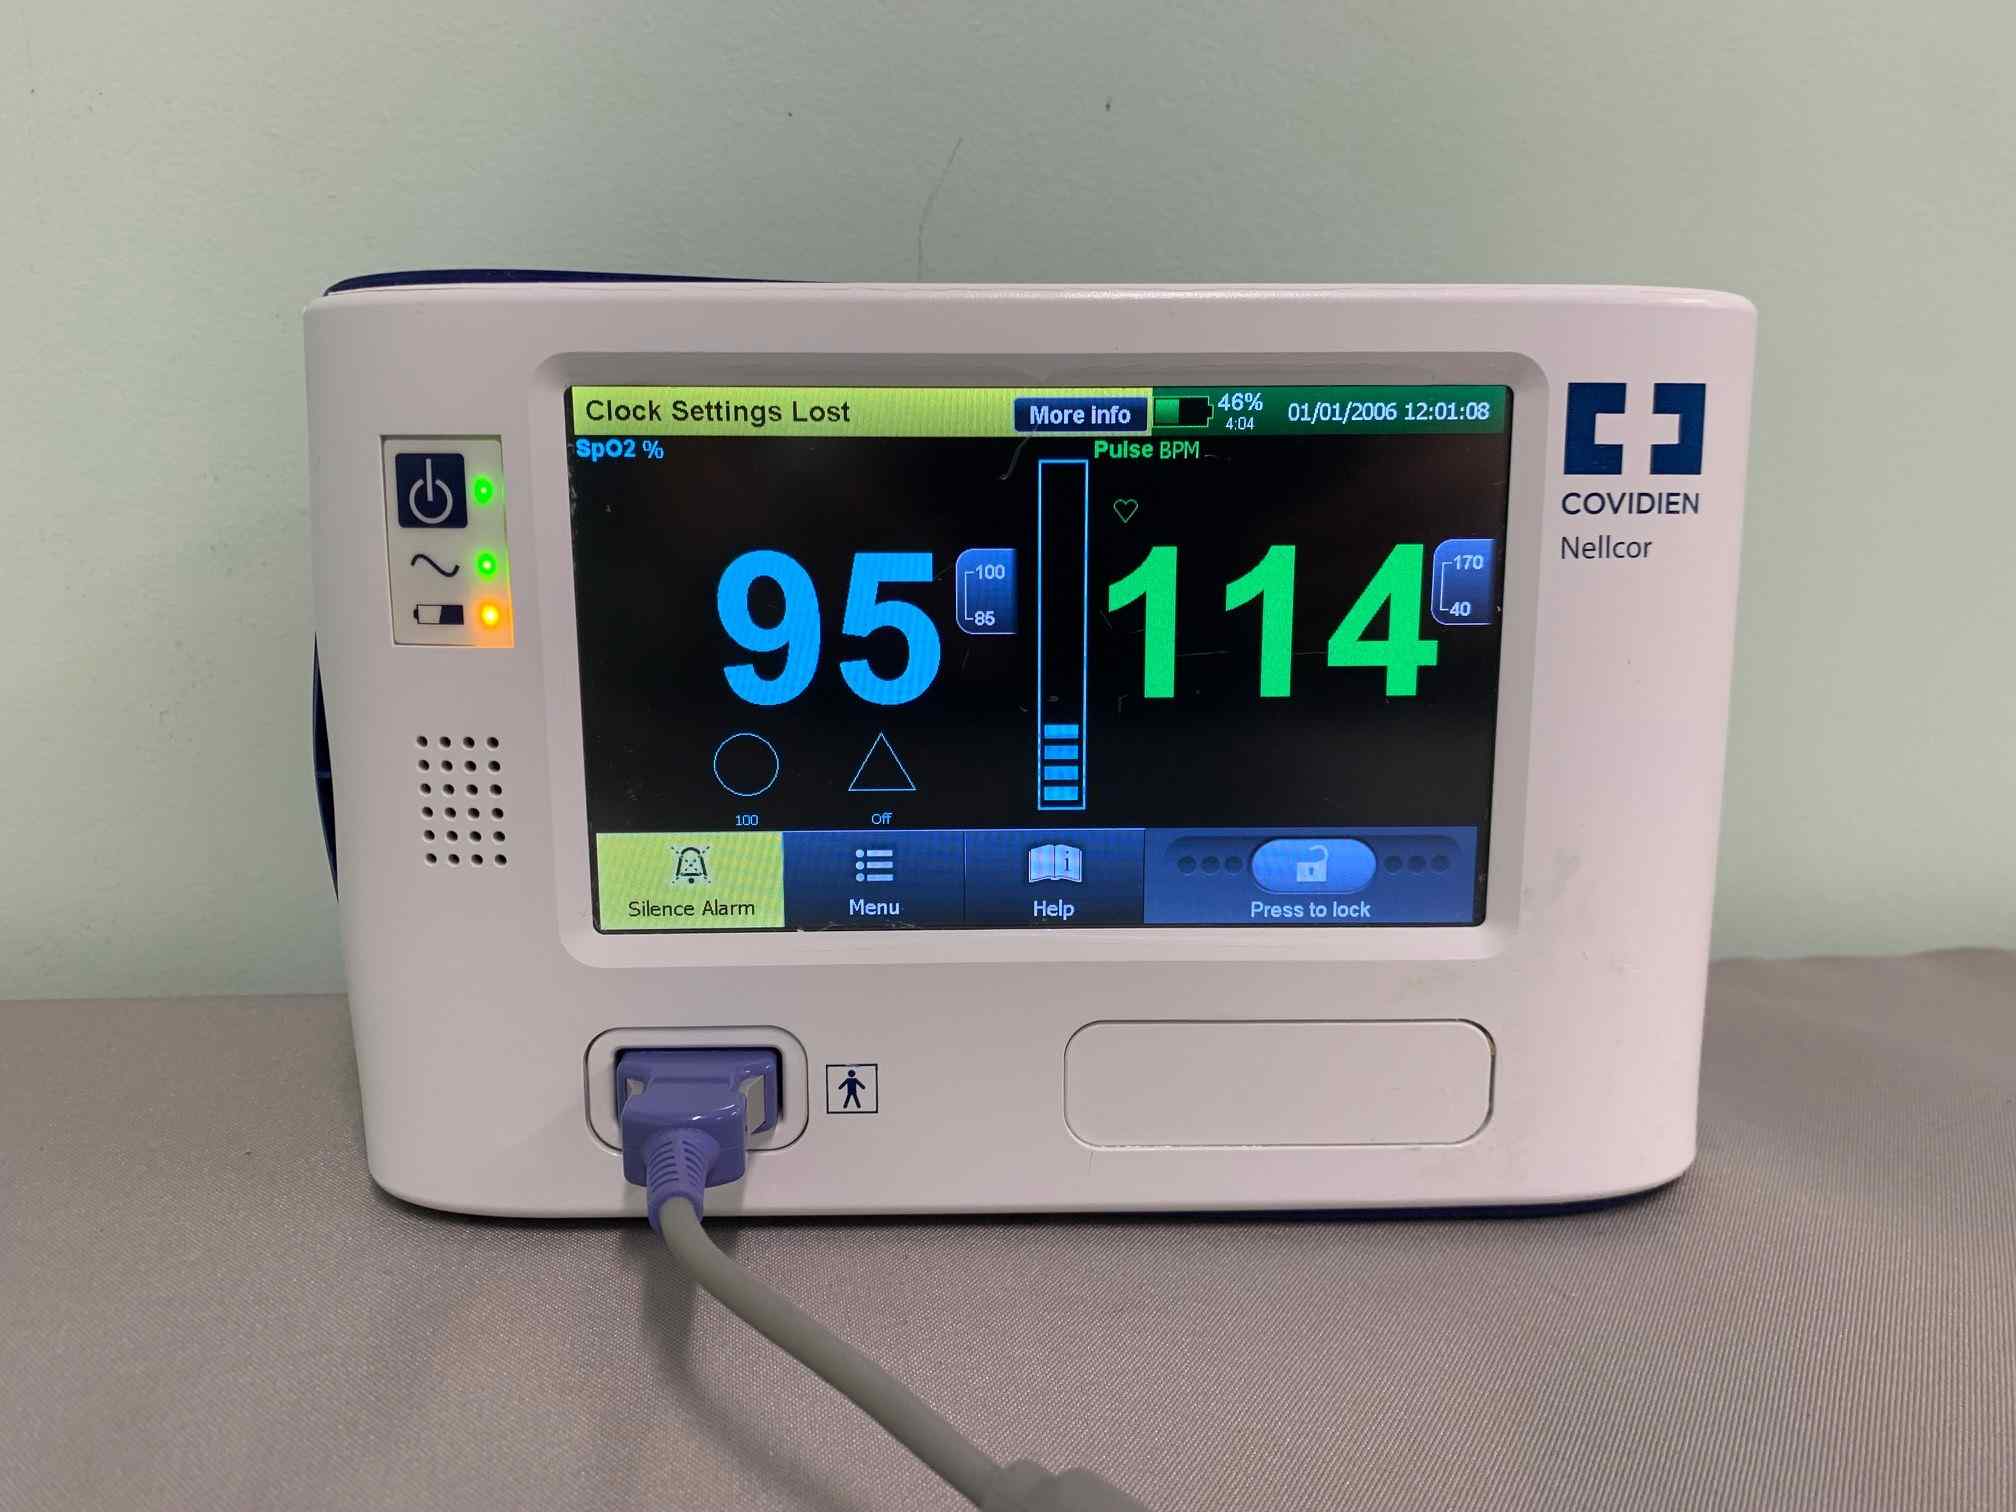 Covidien Nellcor Bedside Respiratory Patient Monitoring System